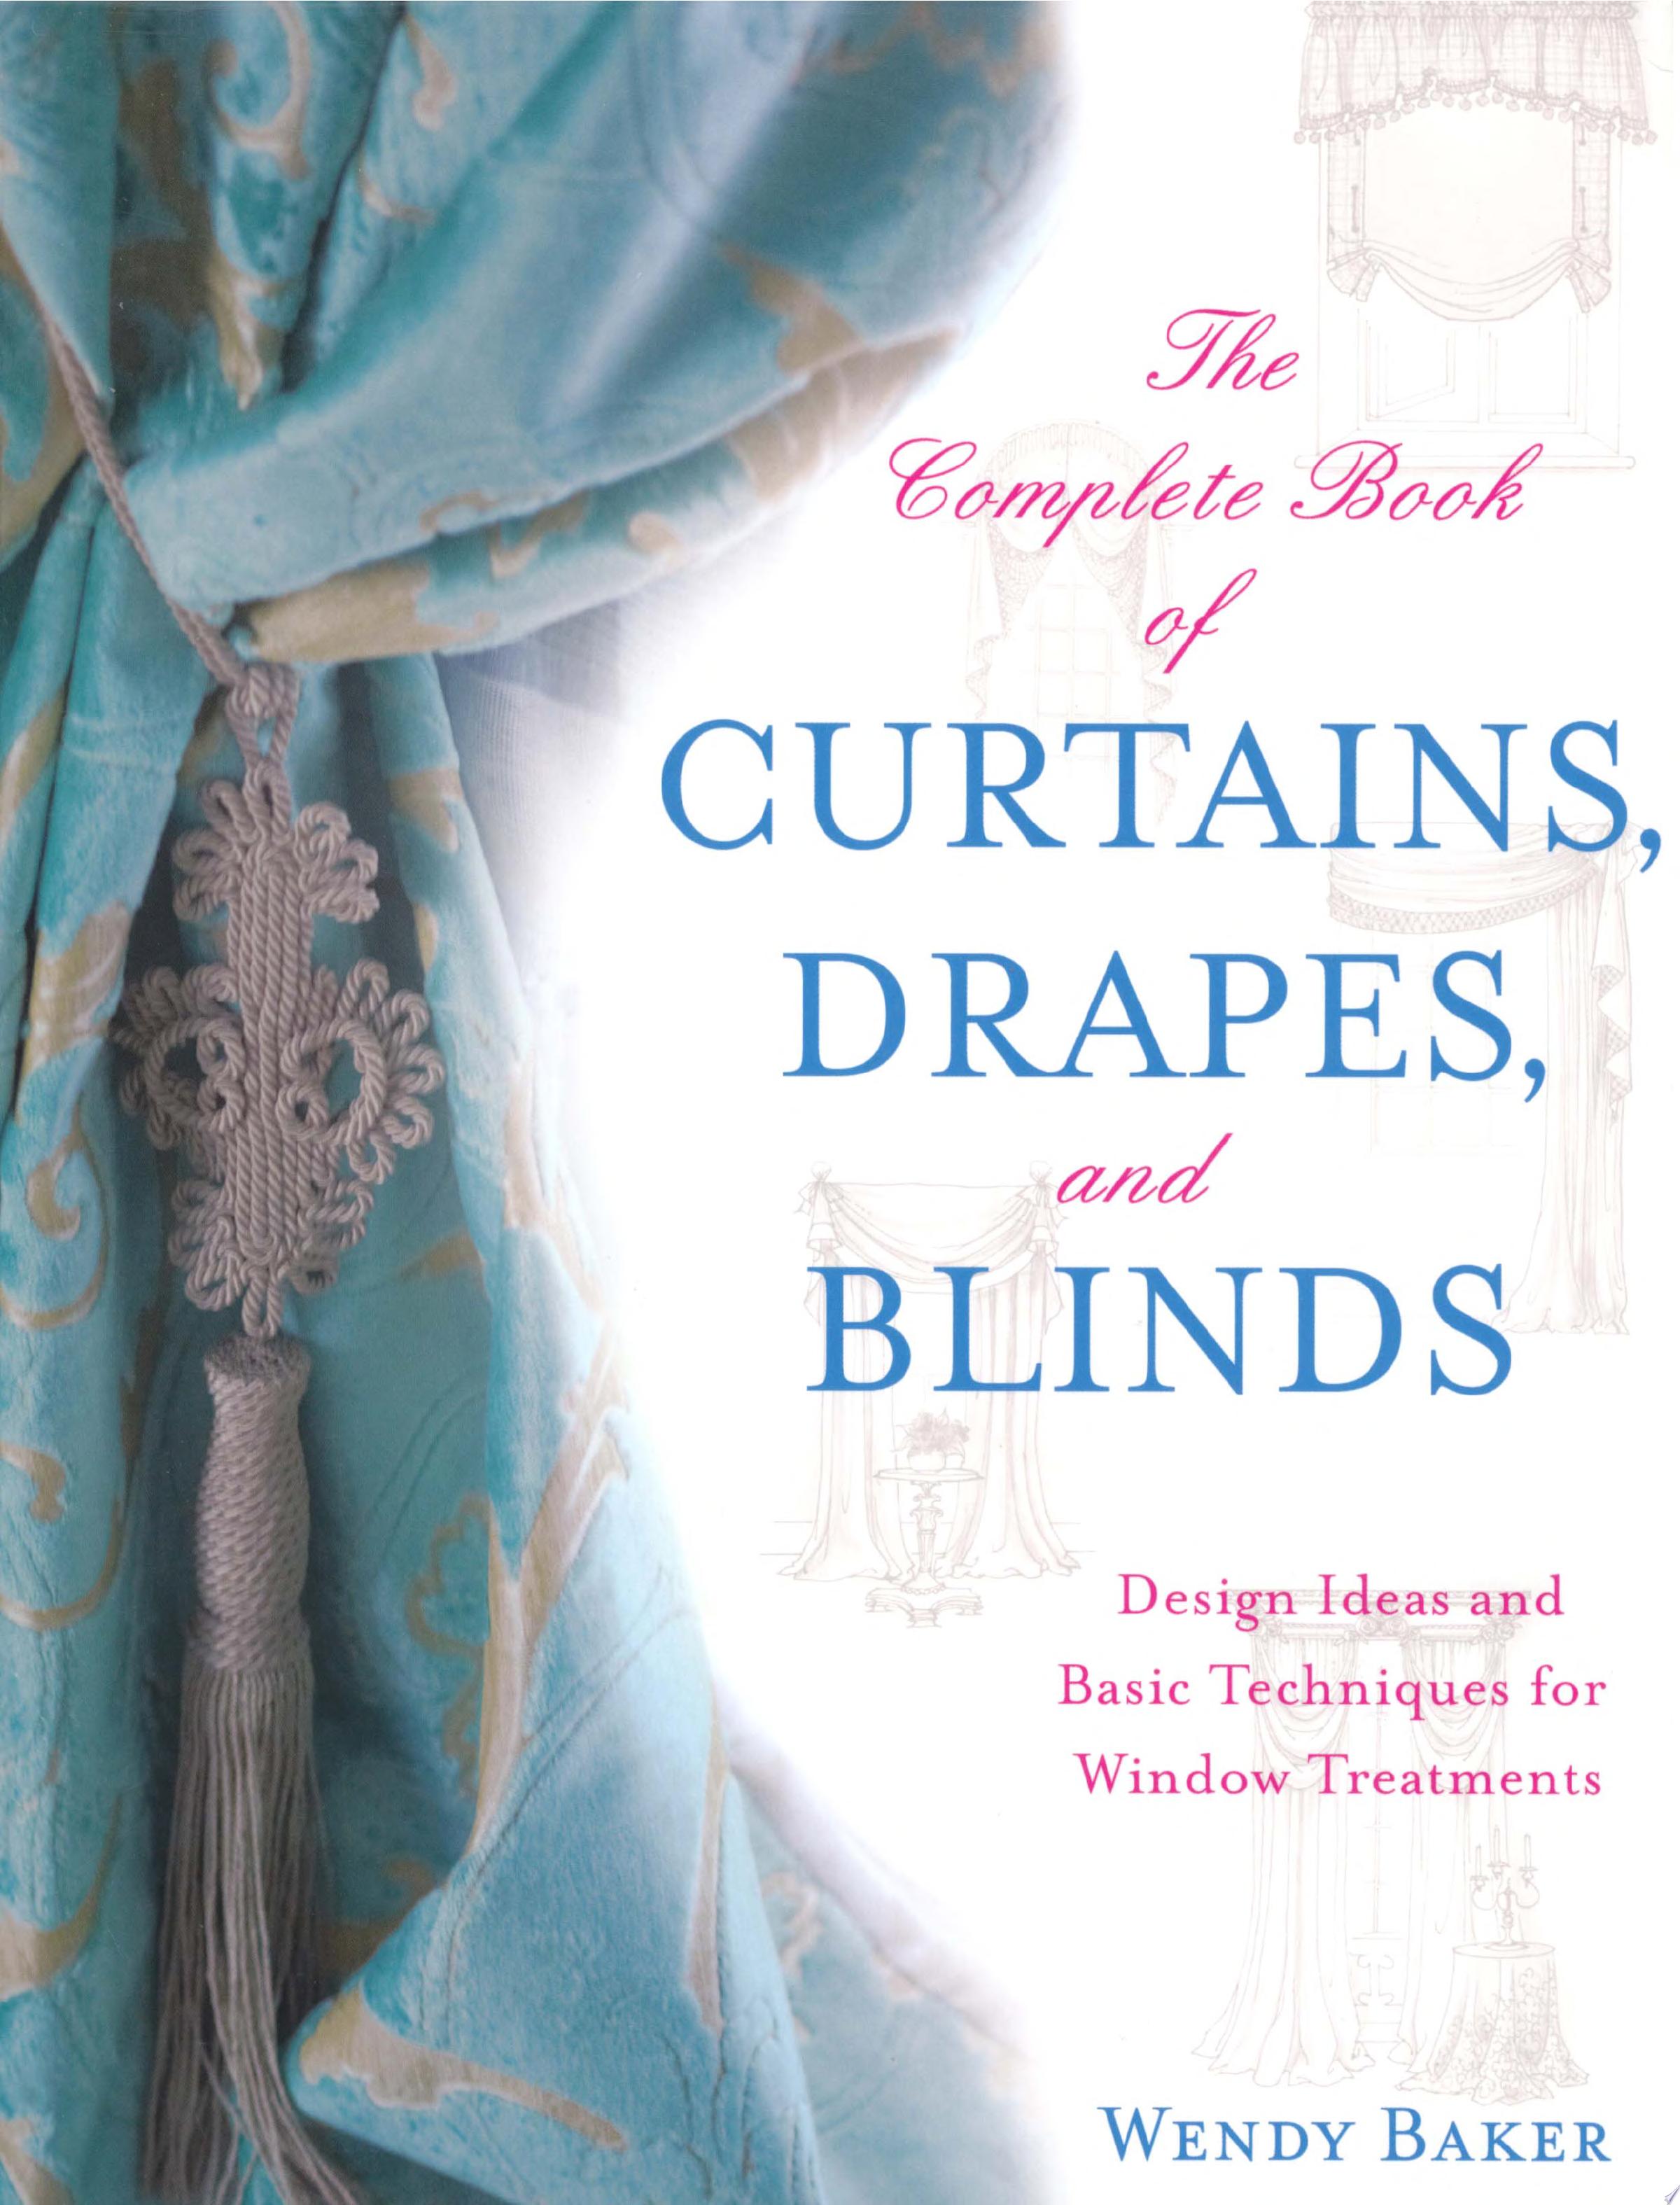 Image for "The Complete Book of Curtains, Drapes, and Blinds"